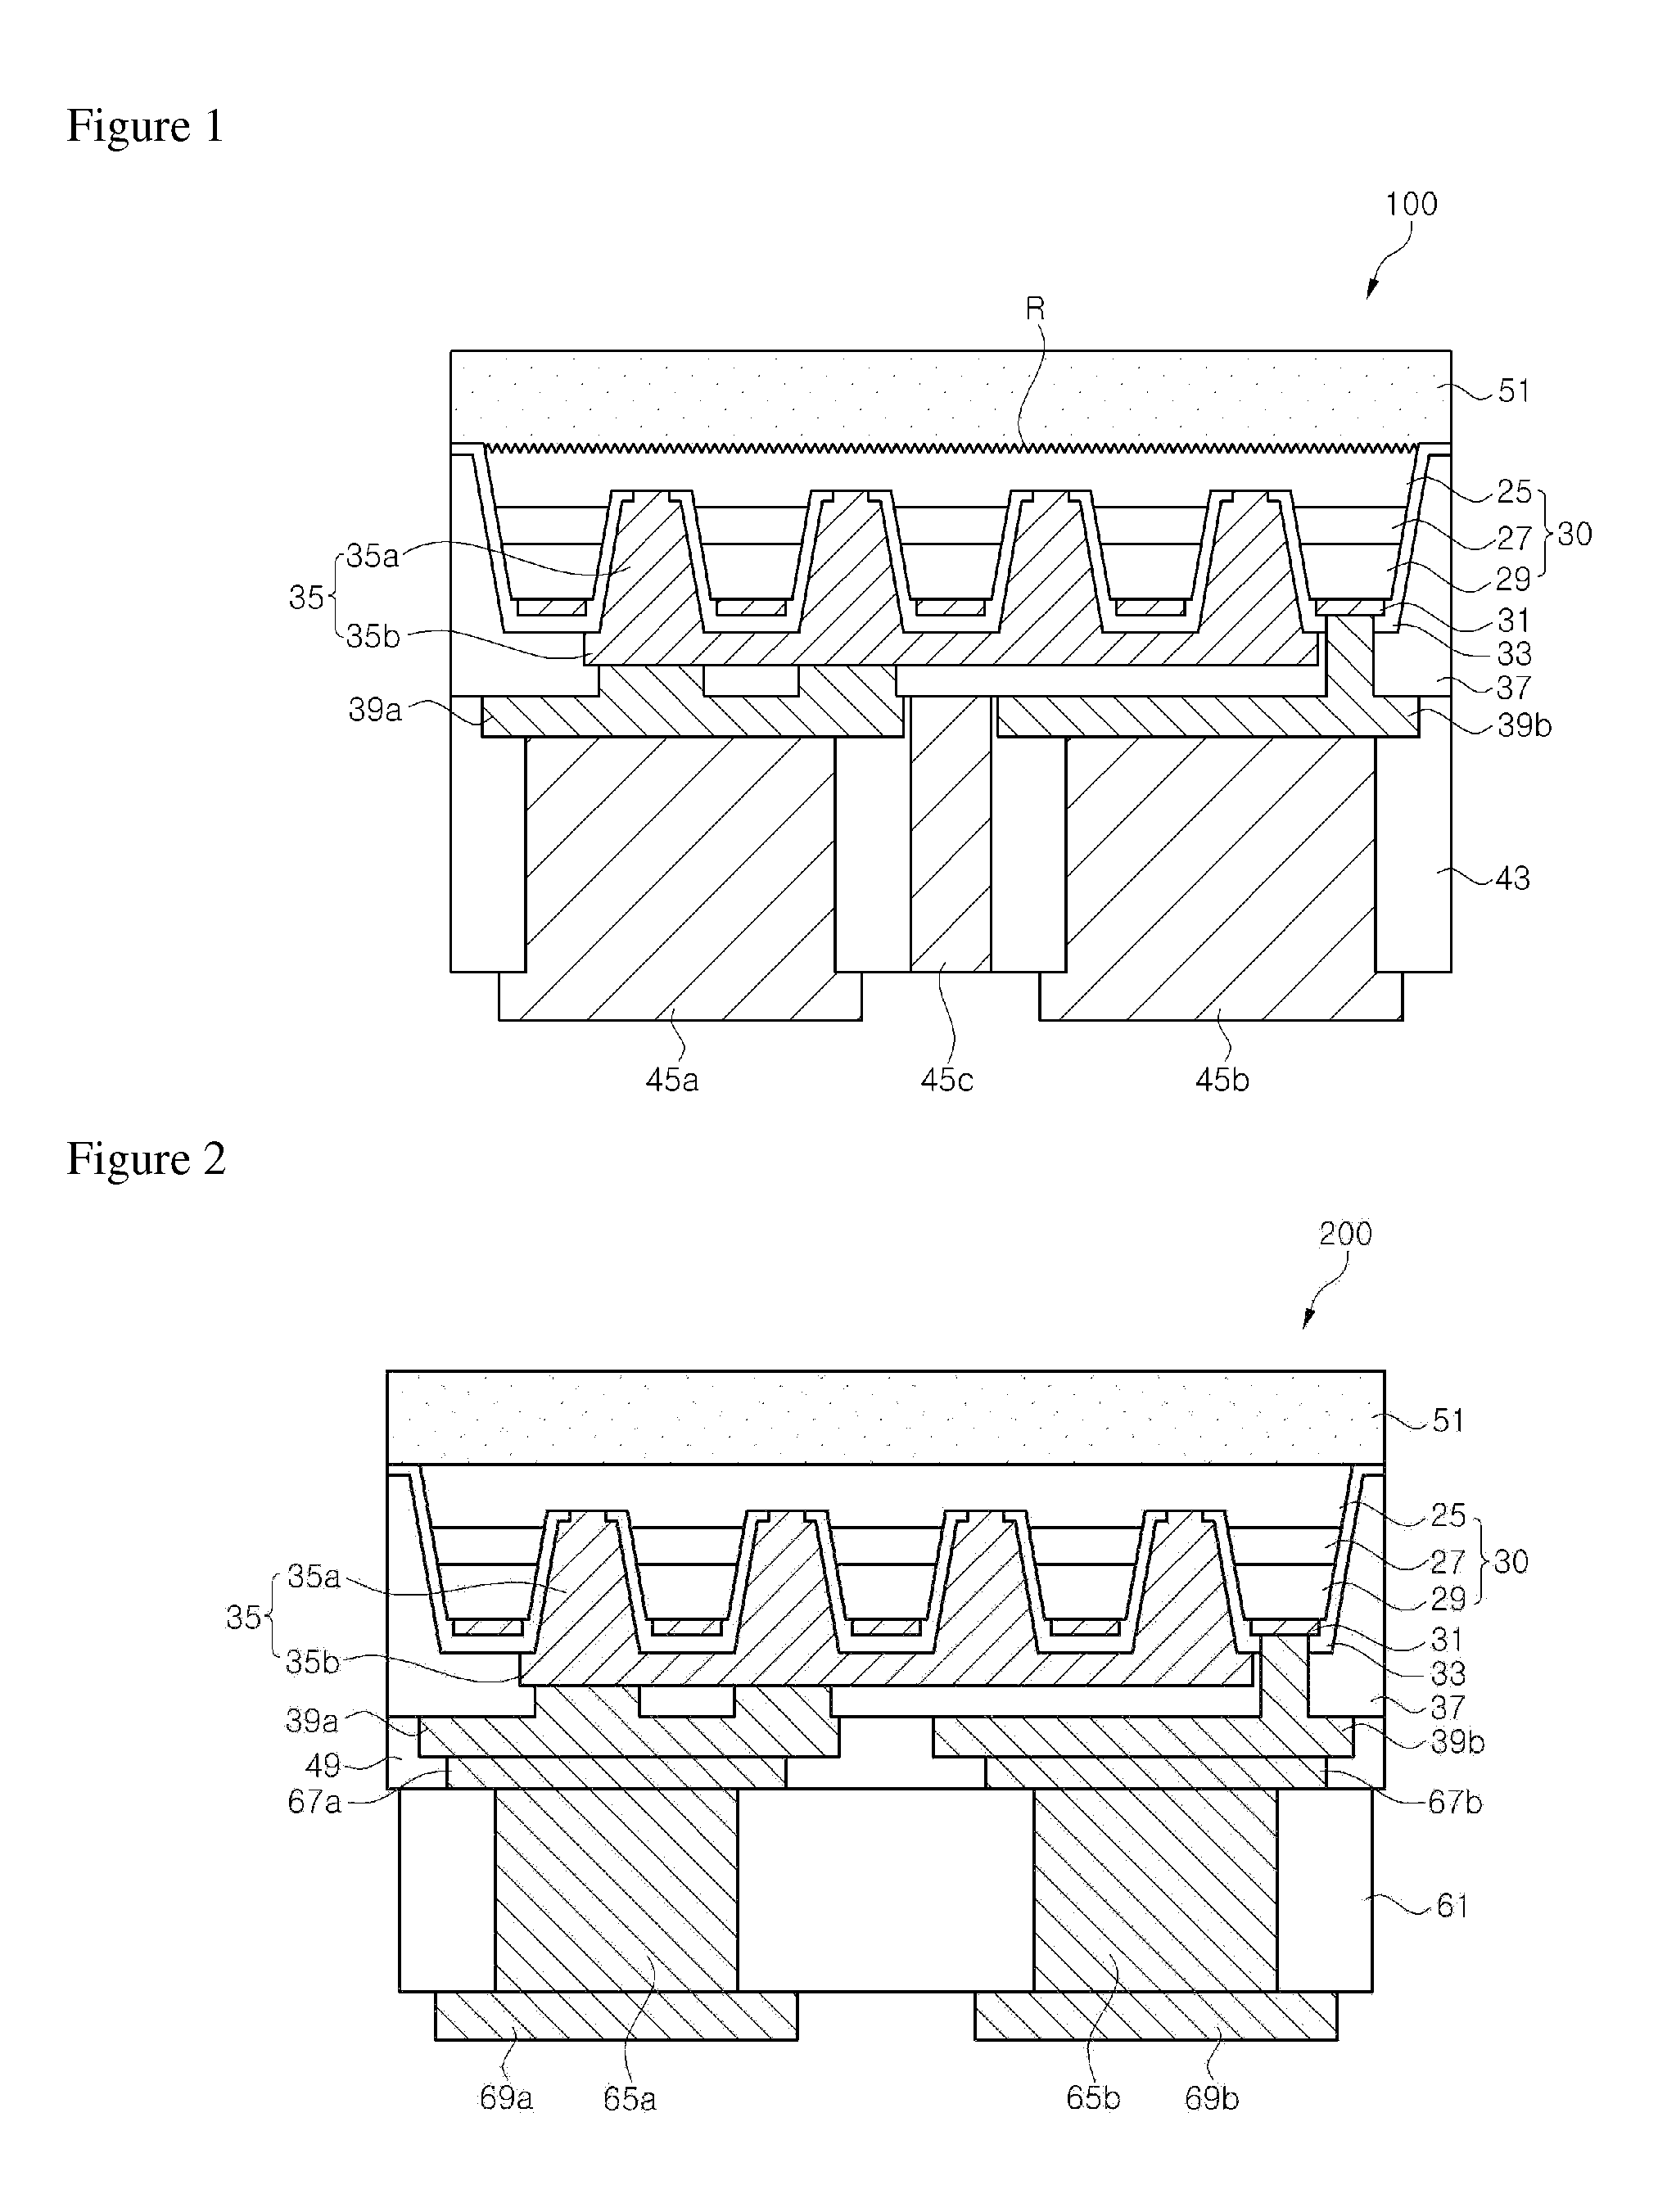 Wafer-level light emitting diode package and method of fabricating the same